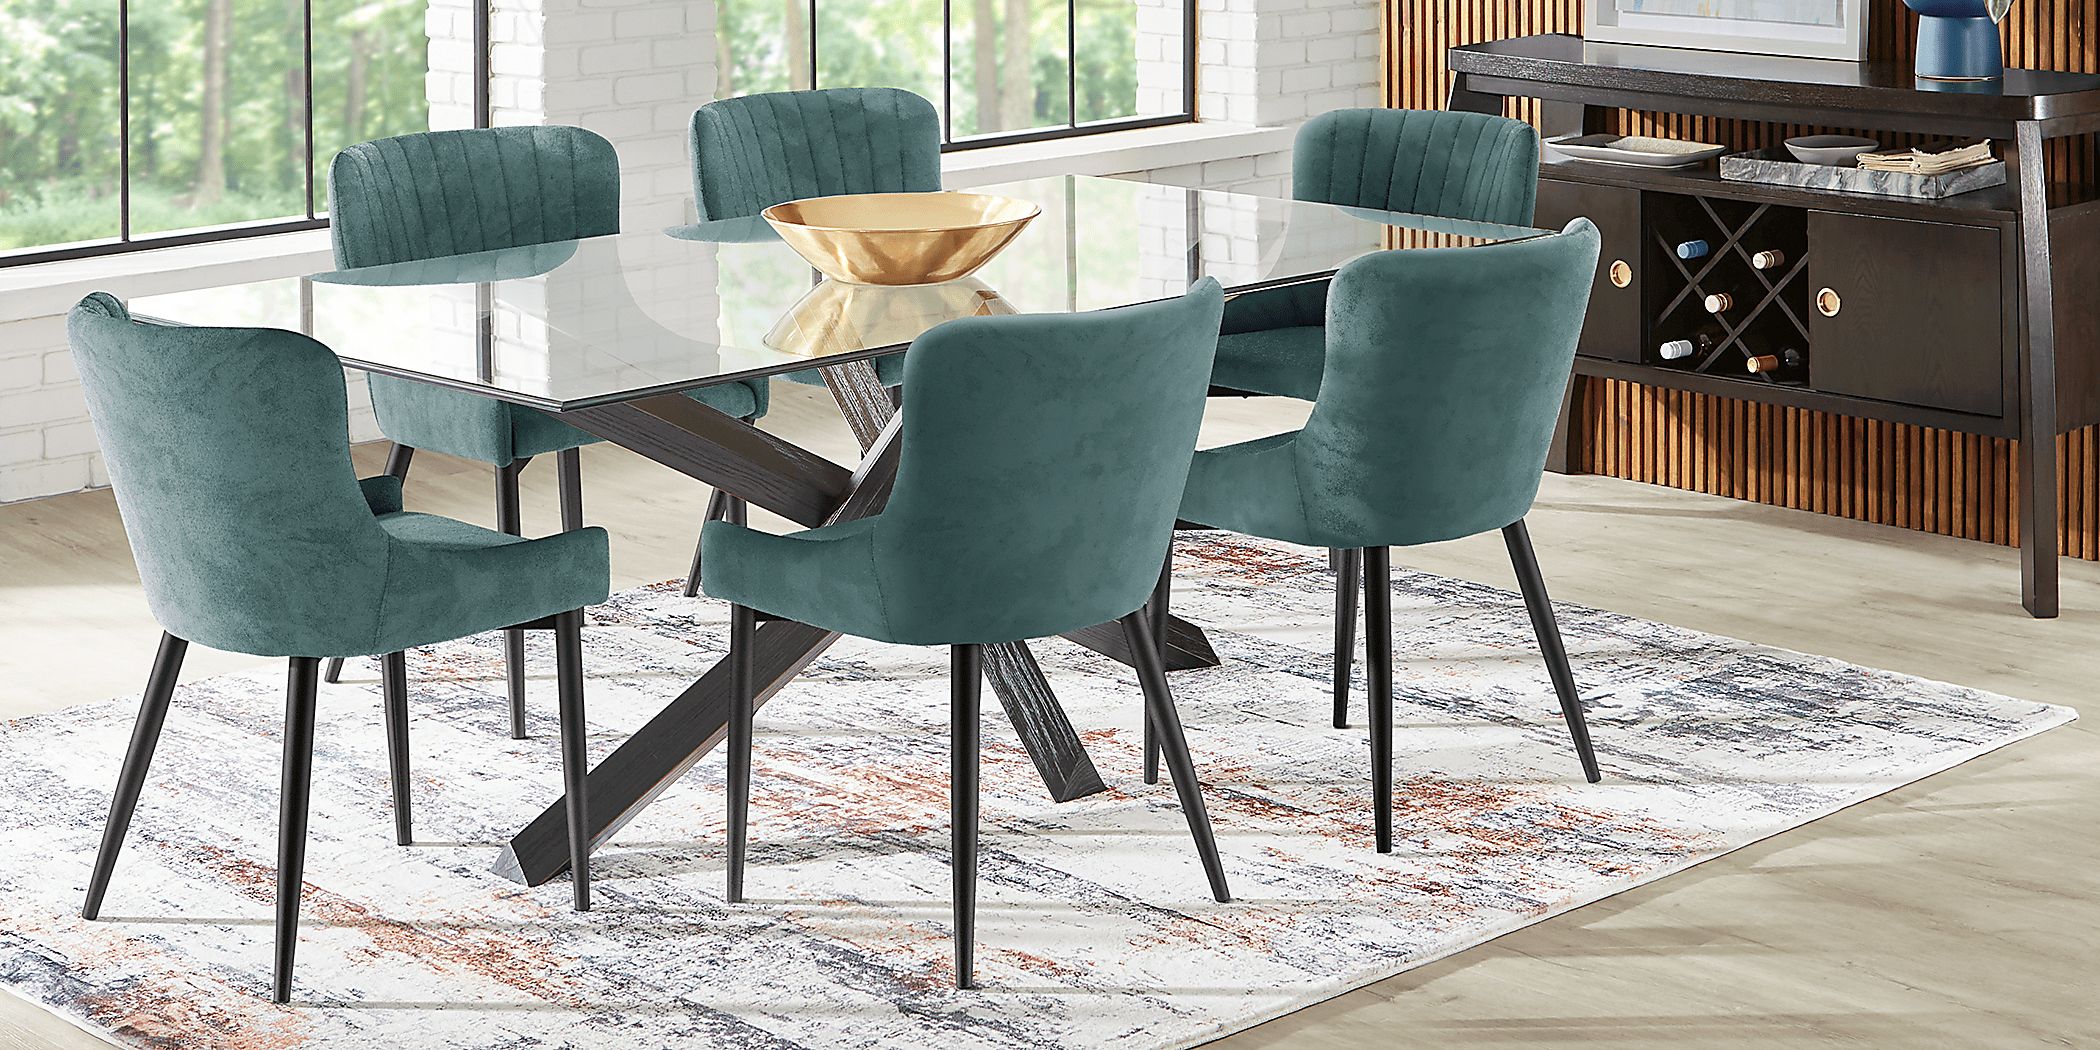 Hollybrooke Black 7 Pc Dining Room with Ink Chairs